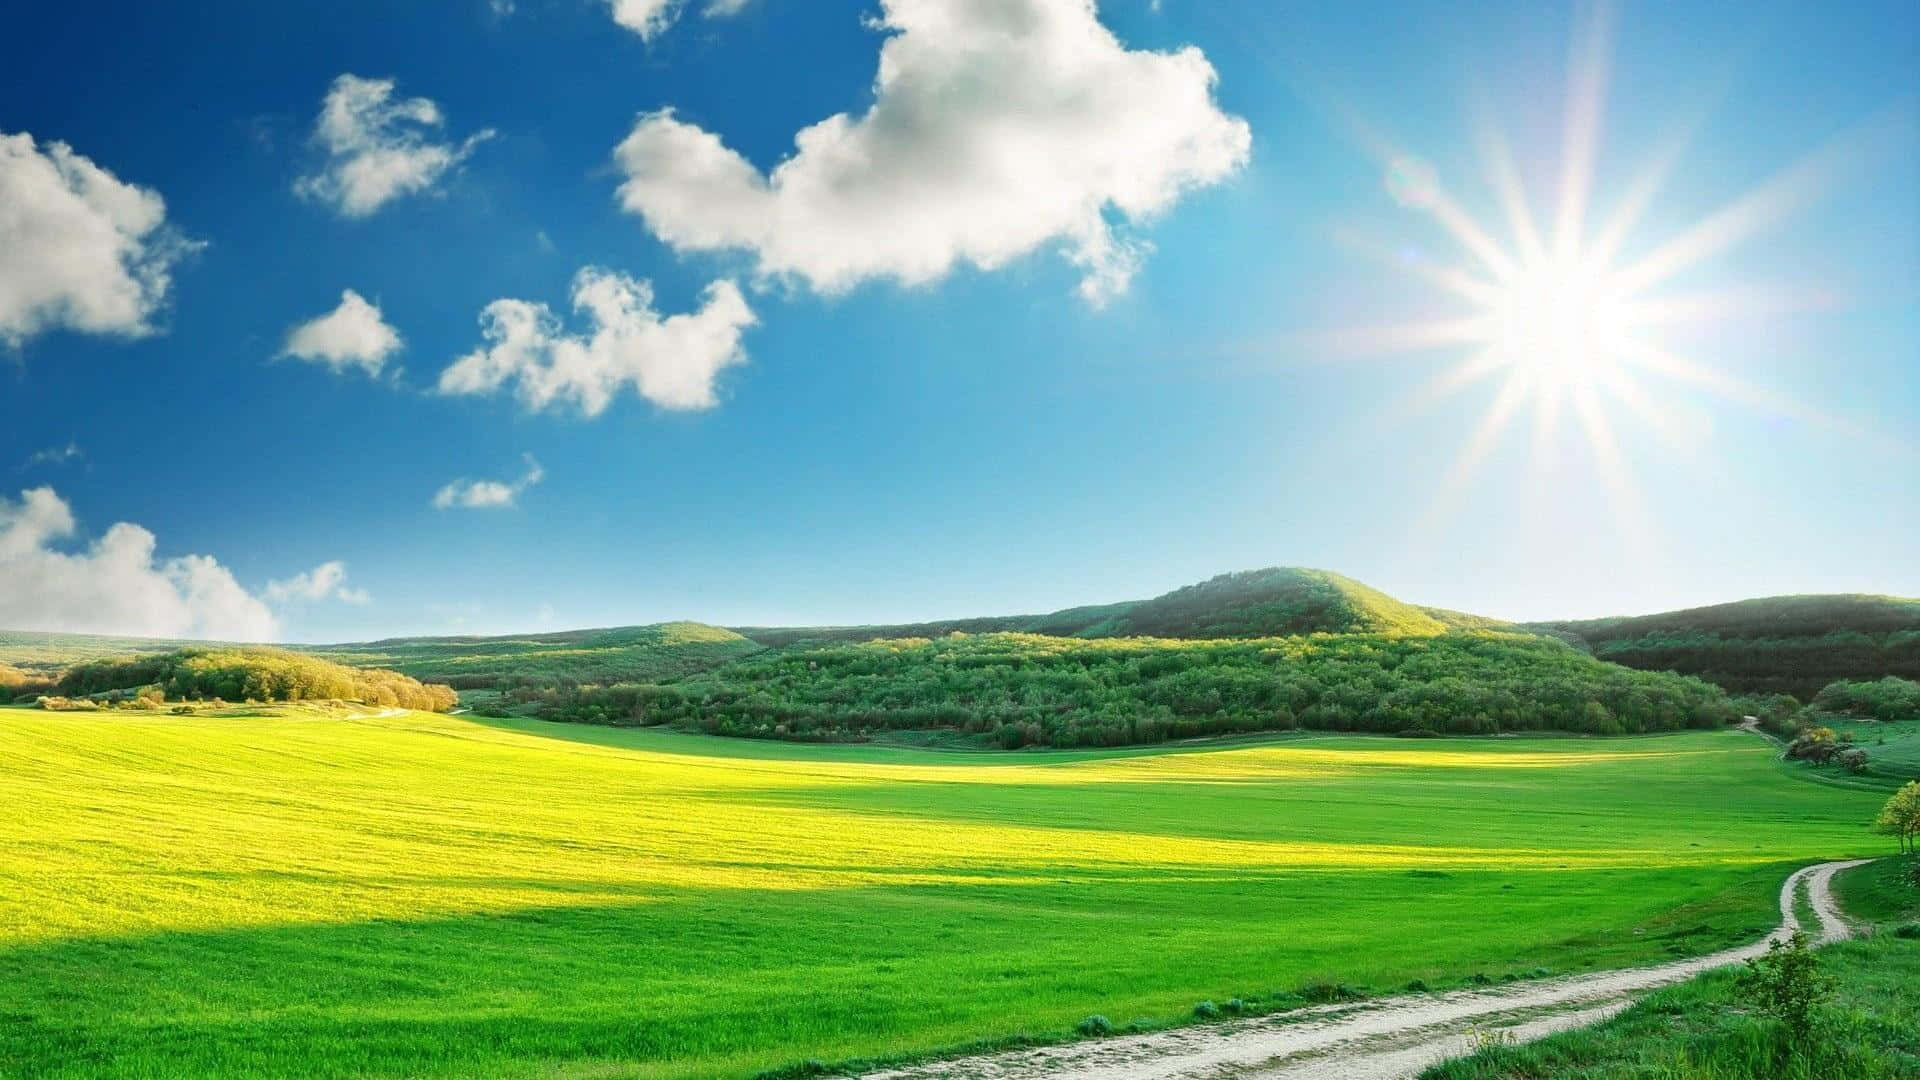 Enjoy the Sunshine of a Sunny Day! Wallpaper